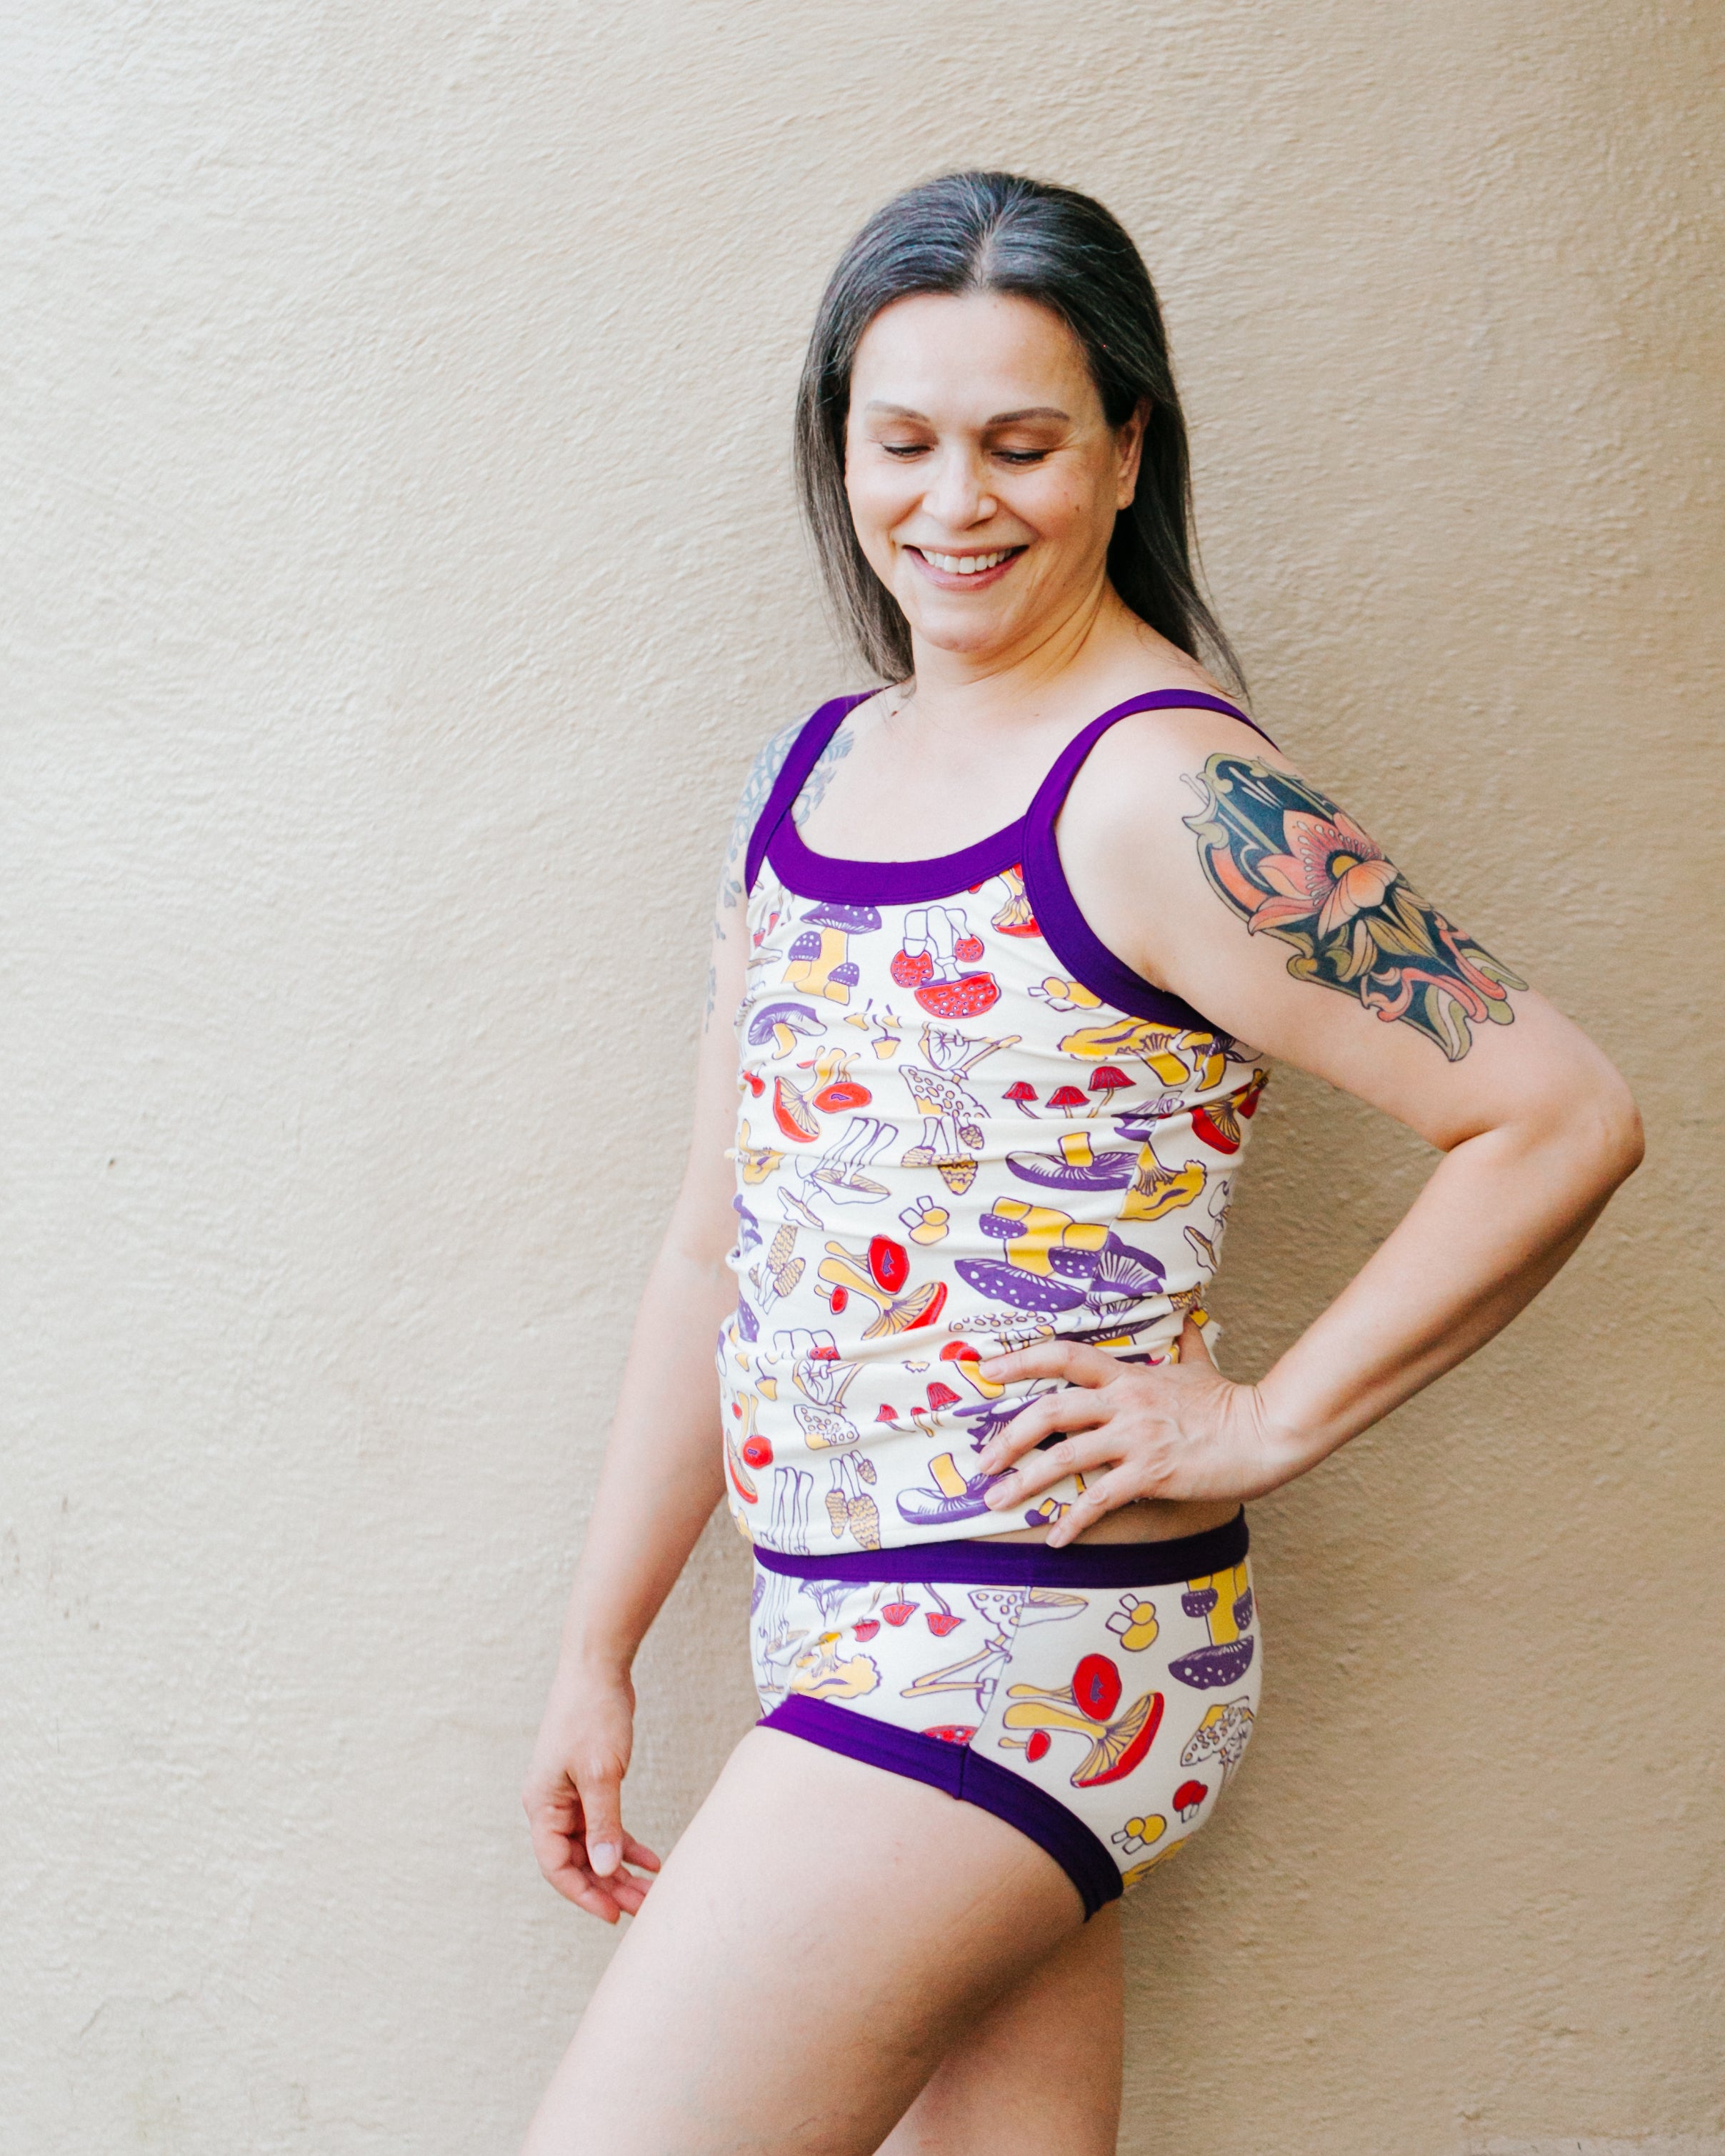 Model against a tan wall wearing a Camisole and Hipster style underwear in Mushroom Magic print: different kinds of mushrooms in red, yellow, and purple colors with dark purple binding.